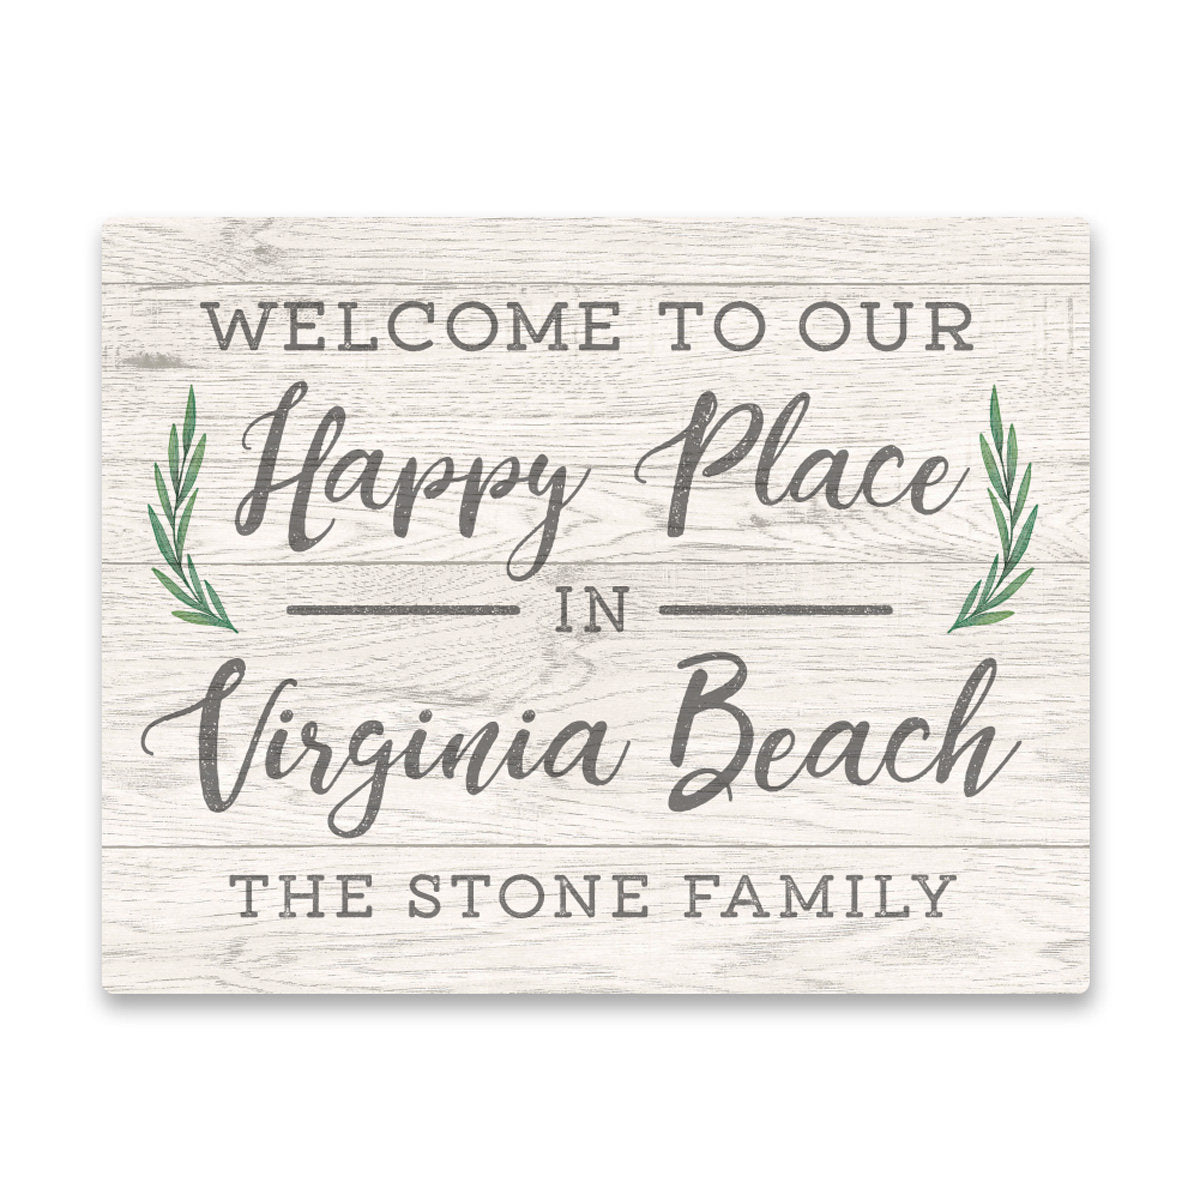 Personalized Welcome to Our Happy Place On Virginia Beach Wall Art